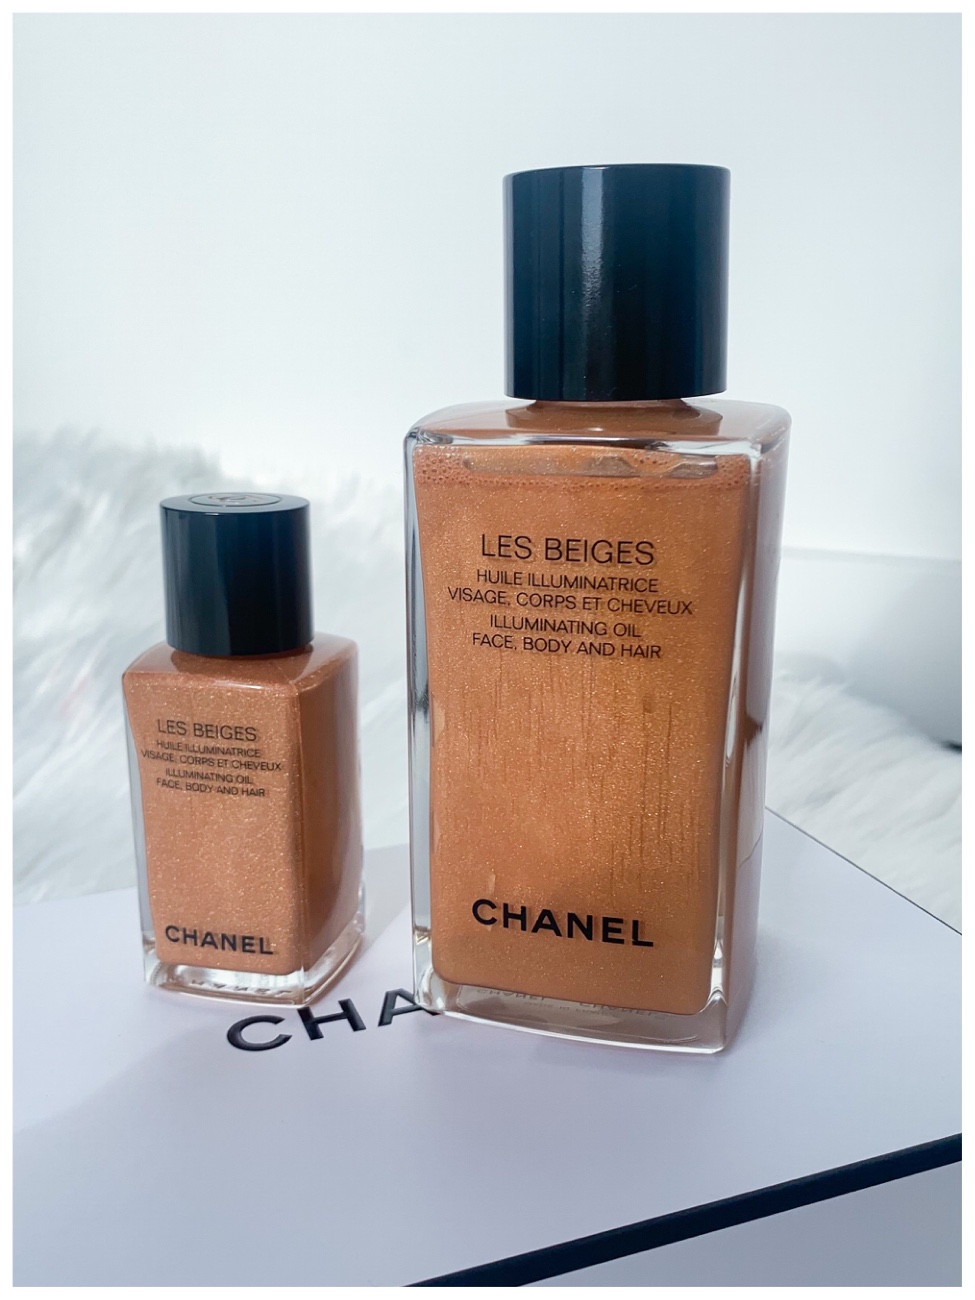 It's back. Chanel's Les Beiges Illuminating Oil was my favorite